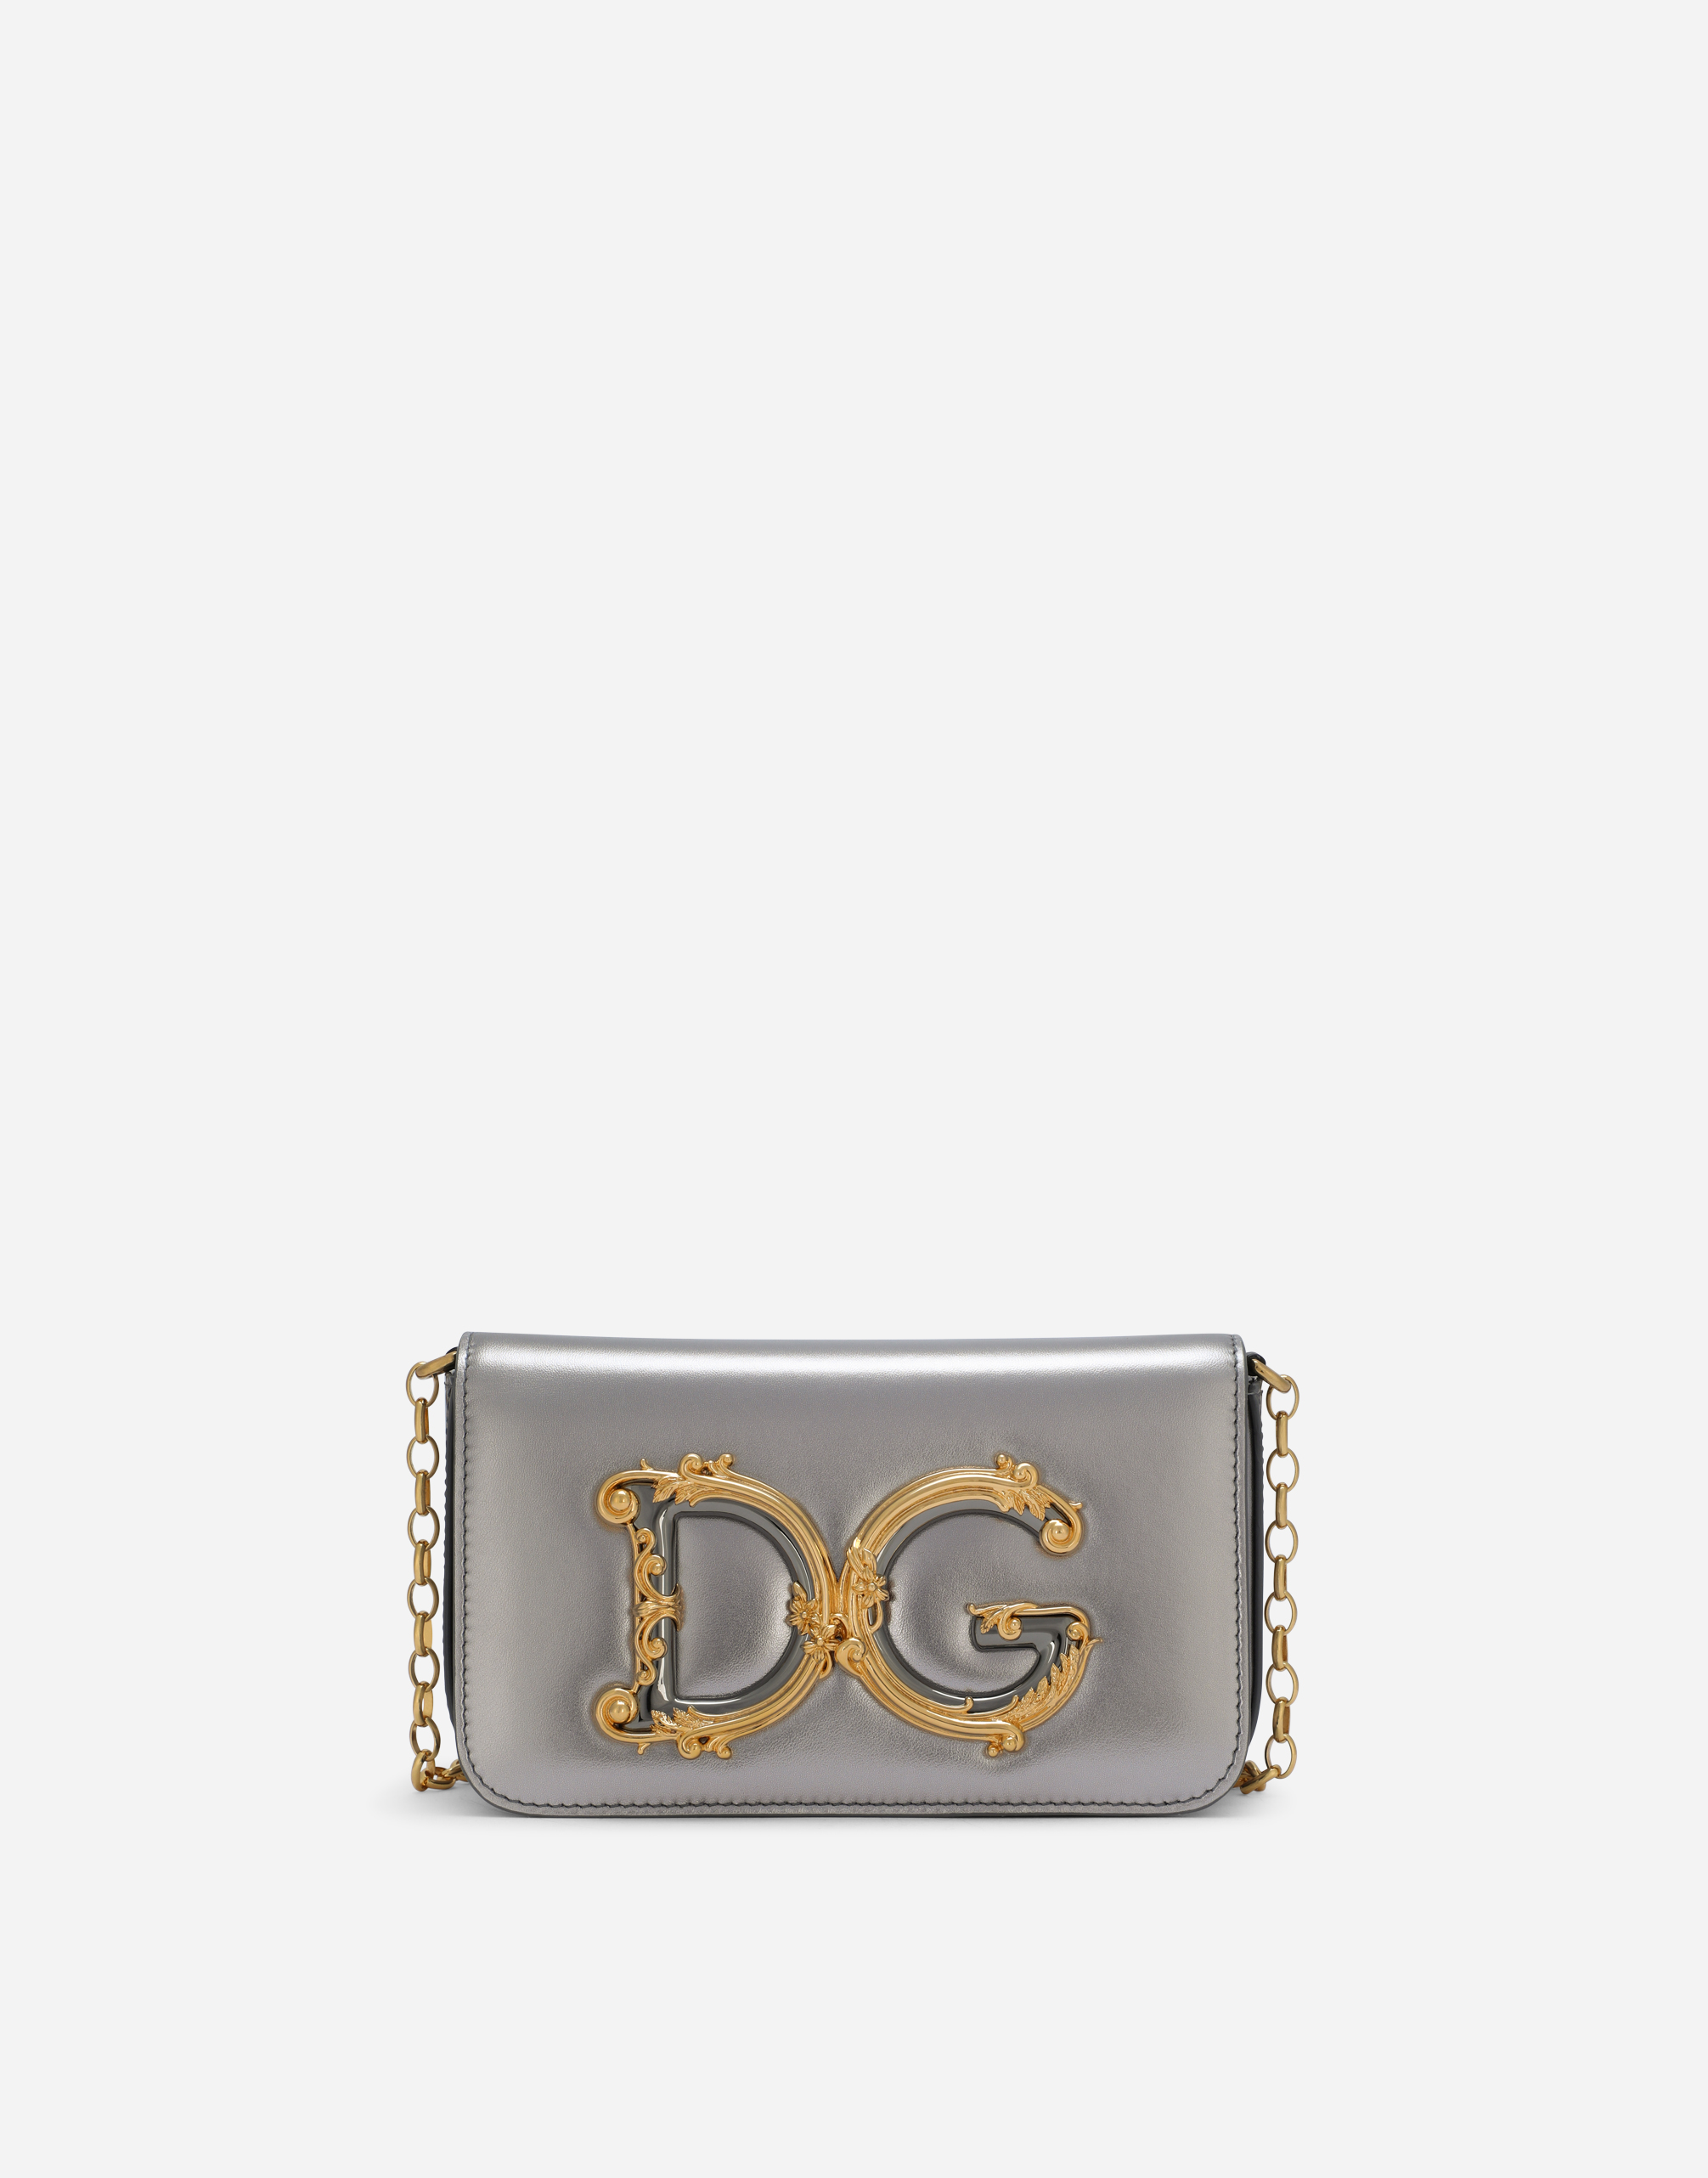 Nappa mordore leather DG Girls clutch in Silver